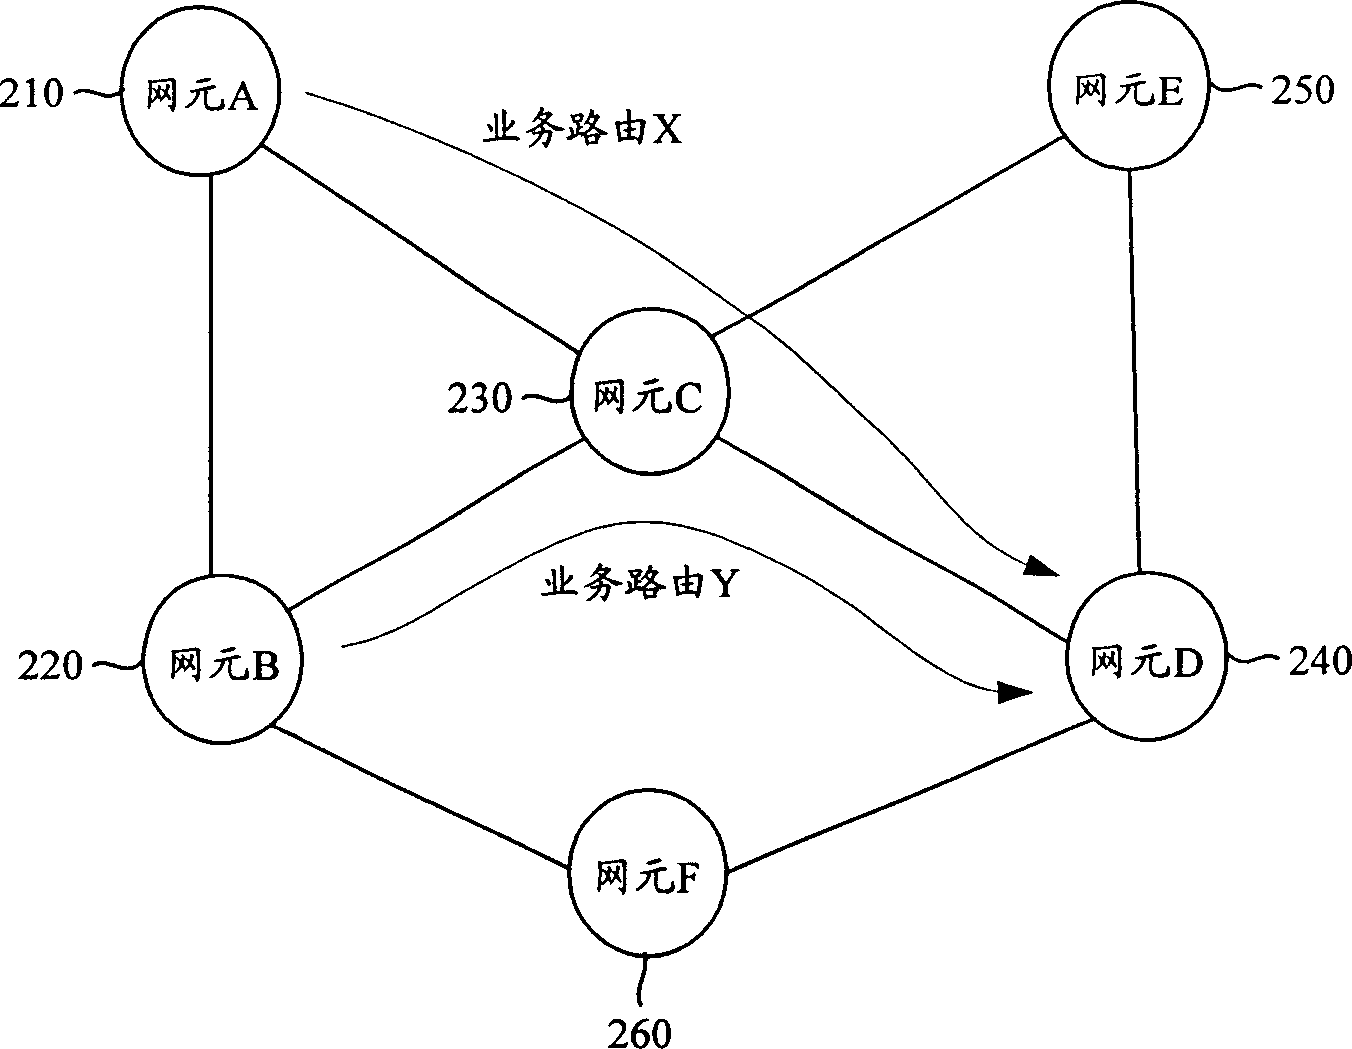 Implementing method of network convergence